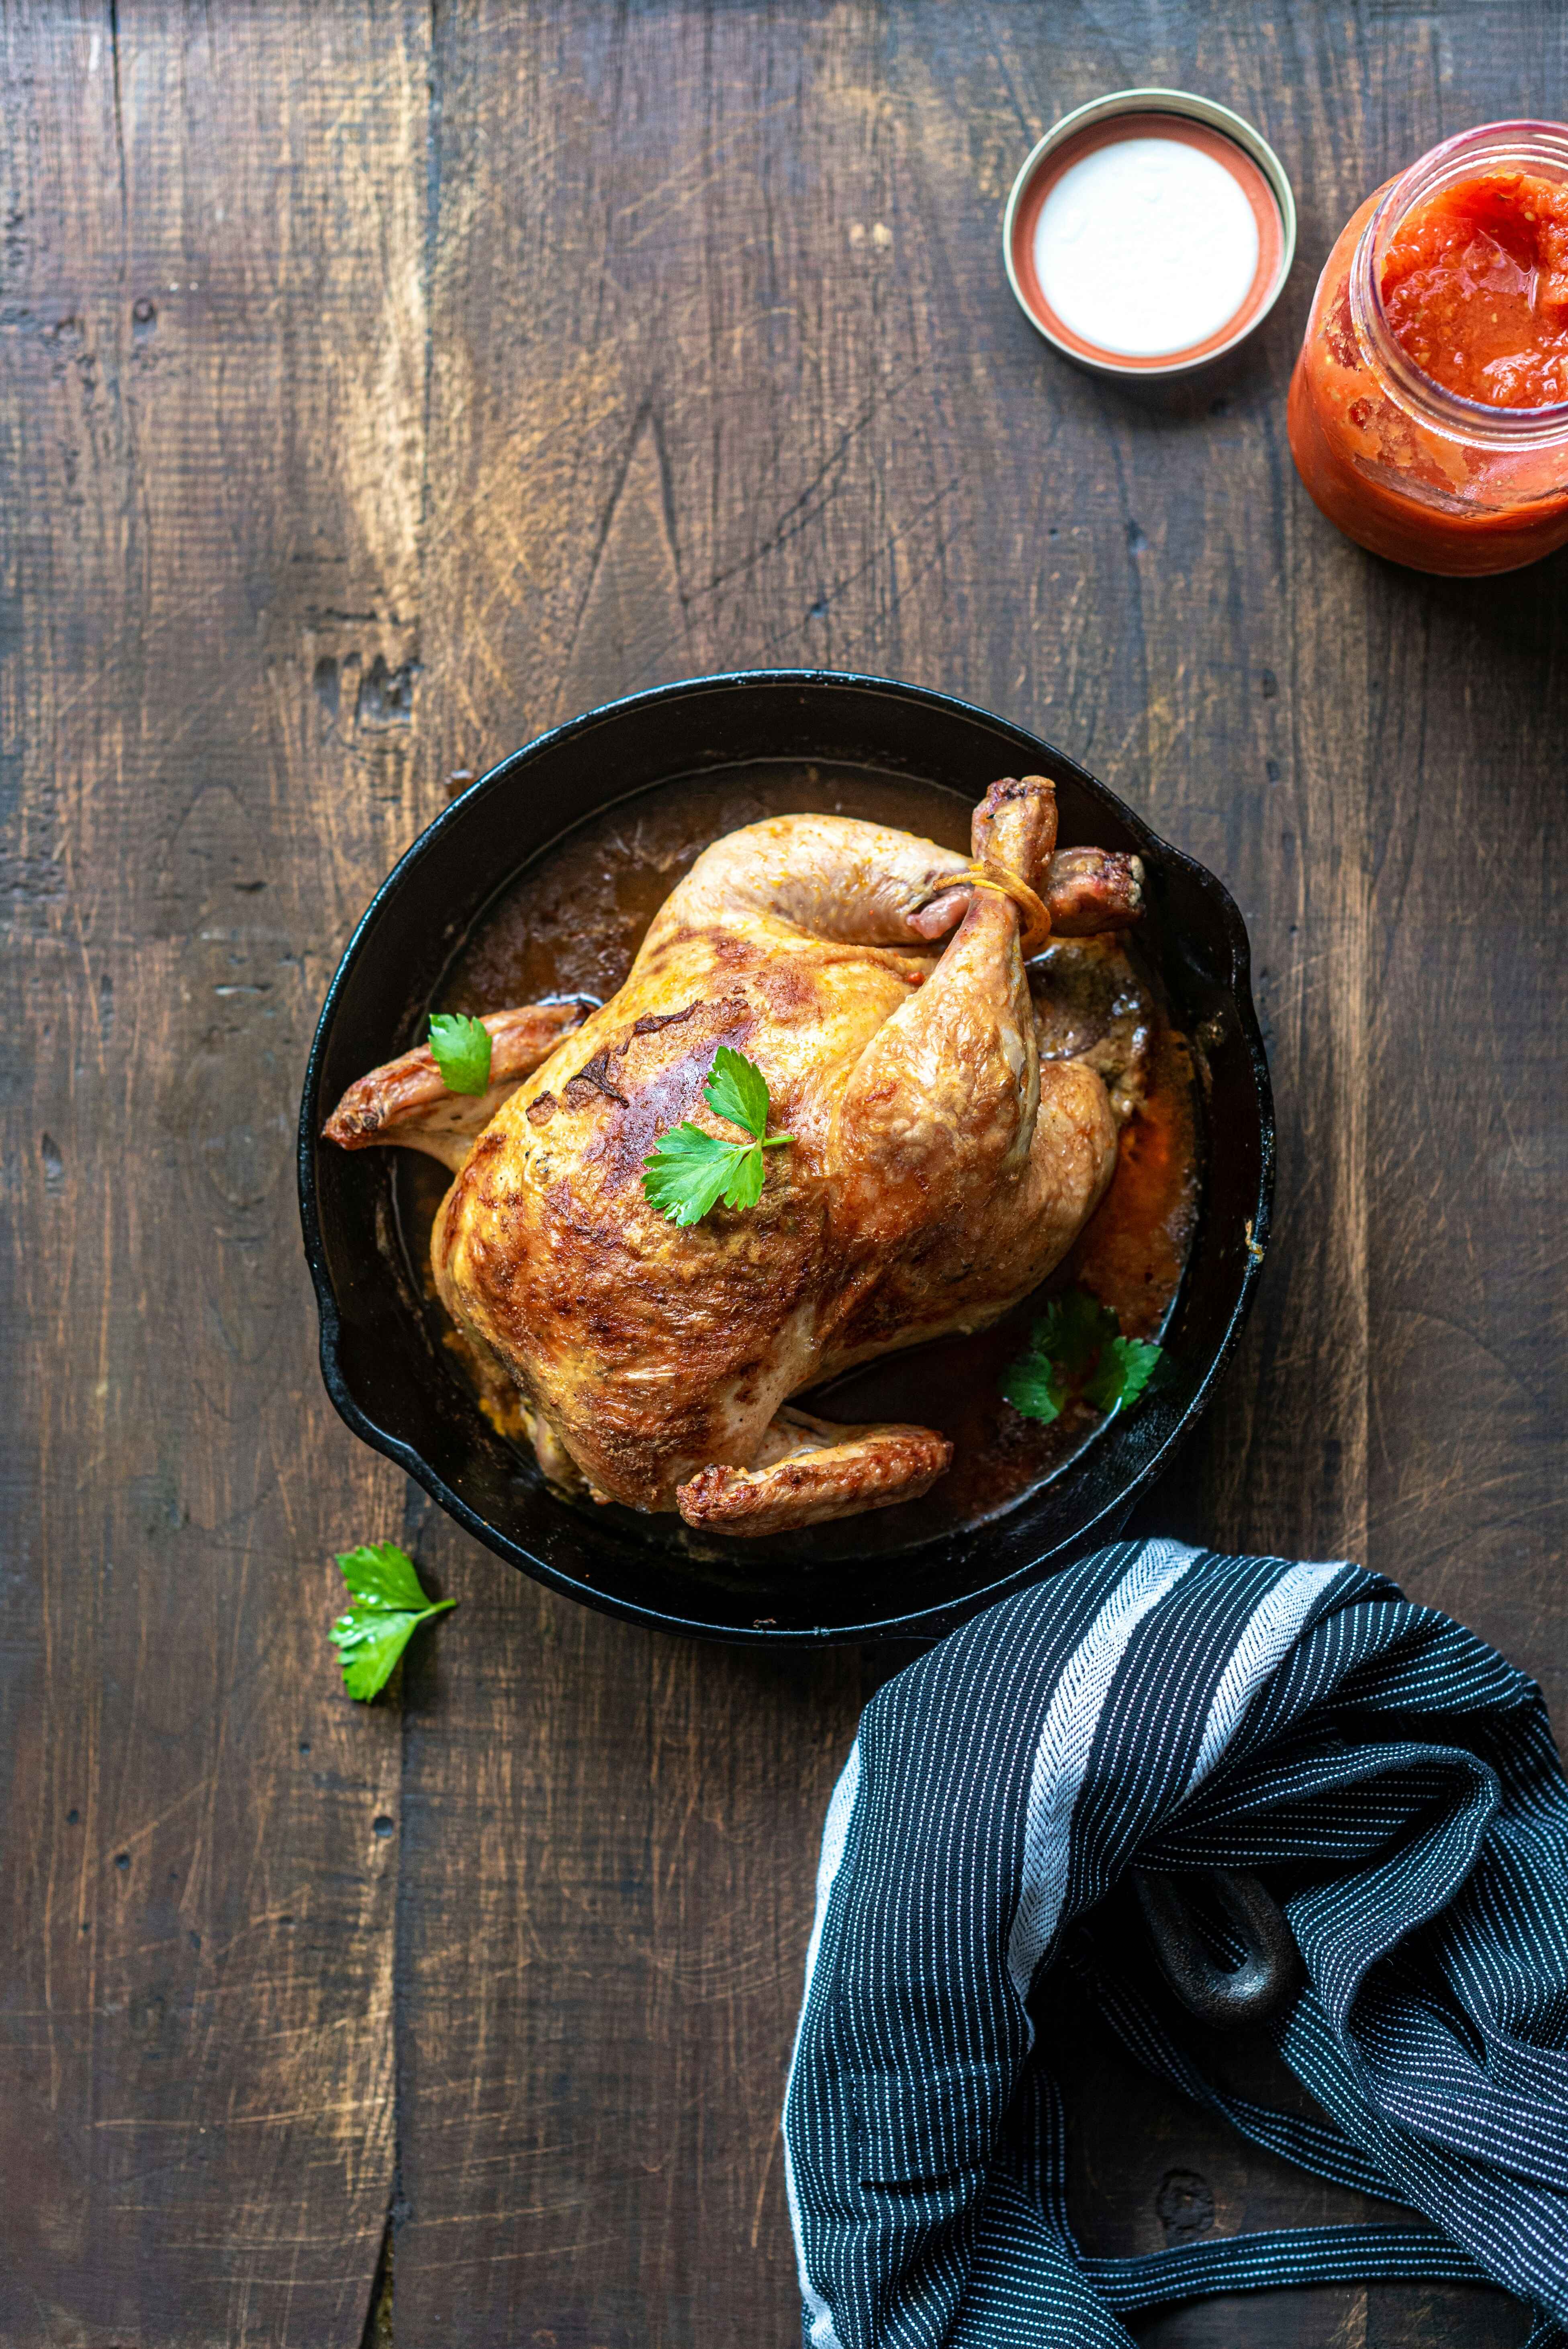 This Tequila Lime Chicken Recipe Is Seriously Delicious